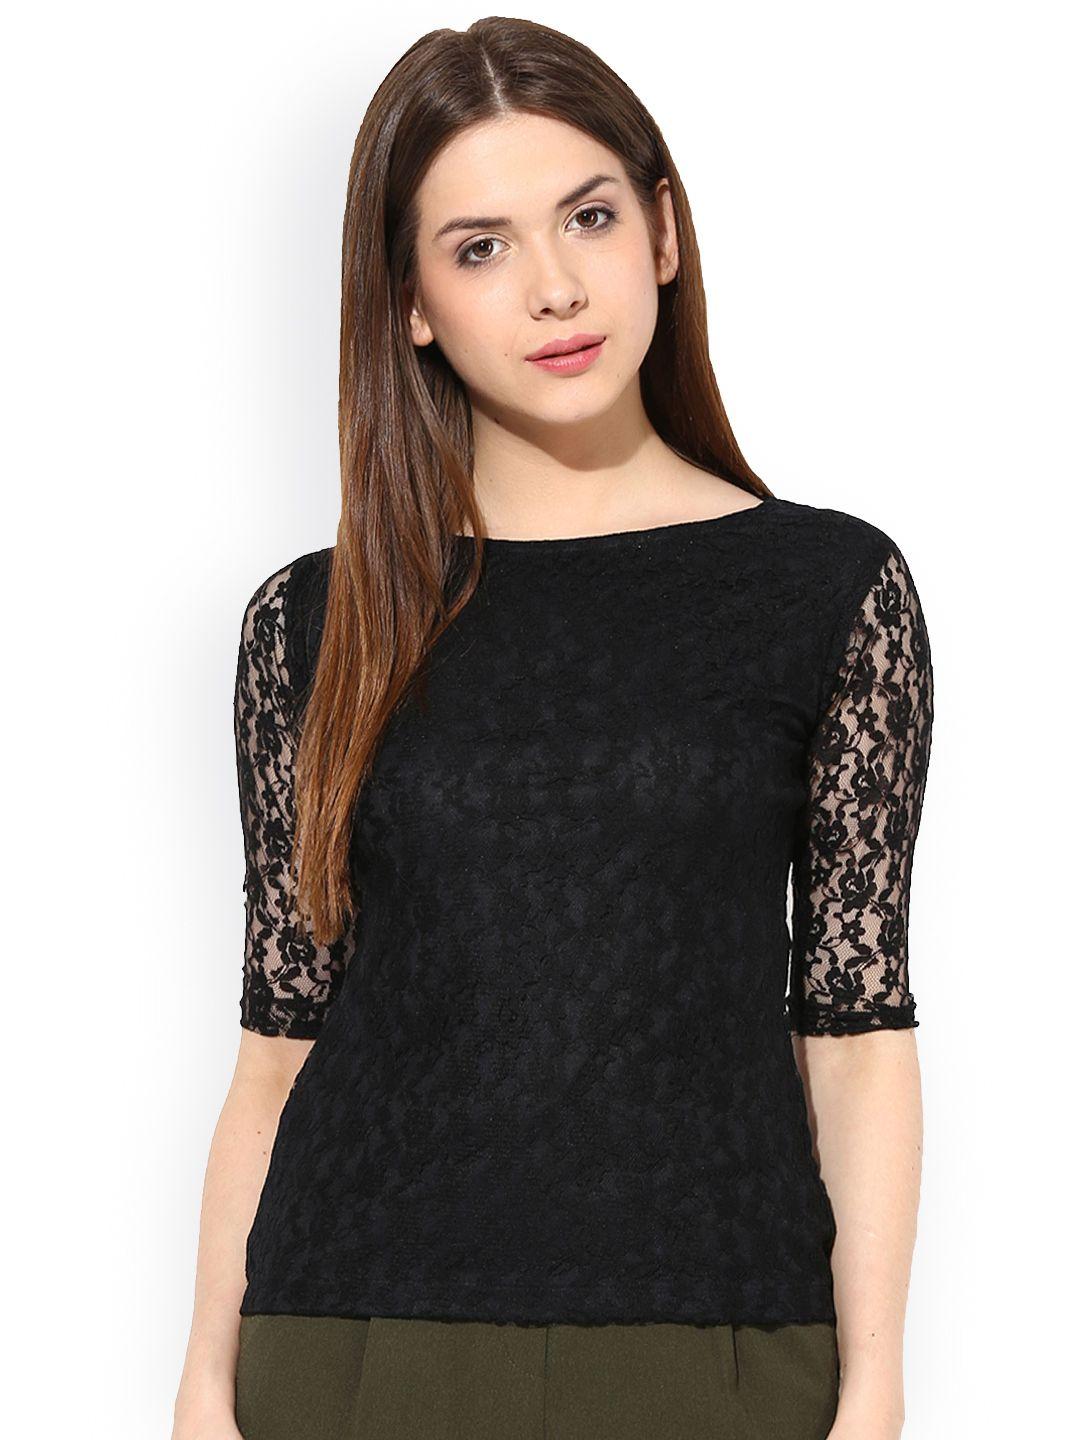 miss-chase-black-lace-top